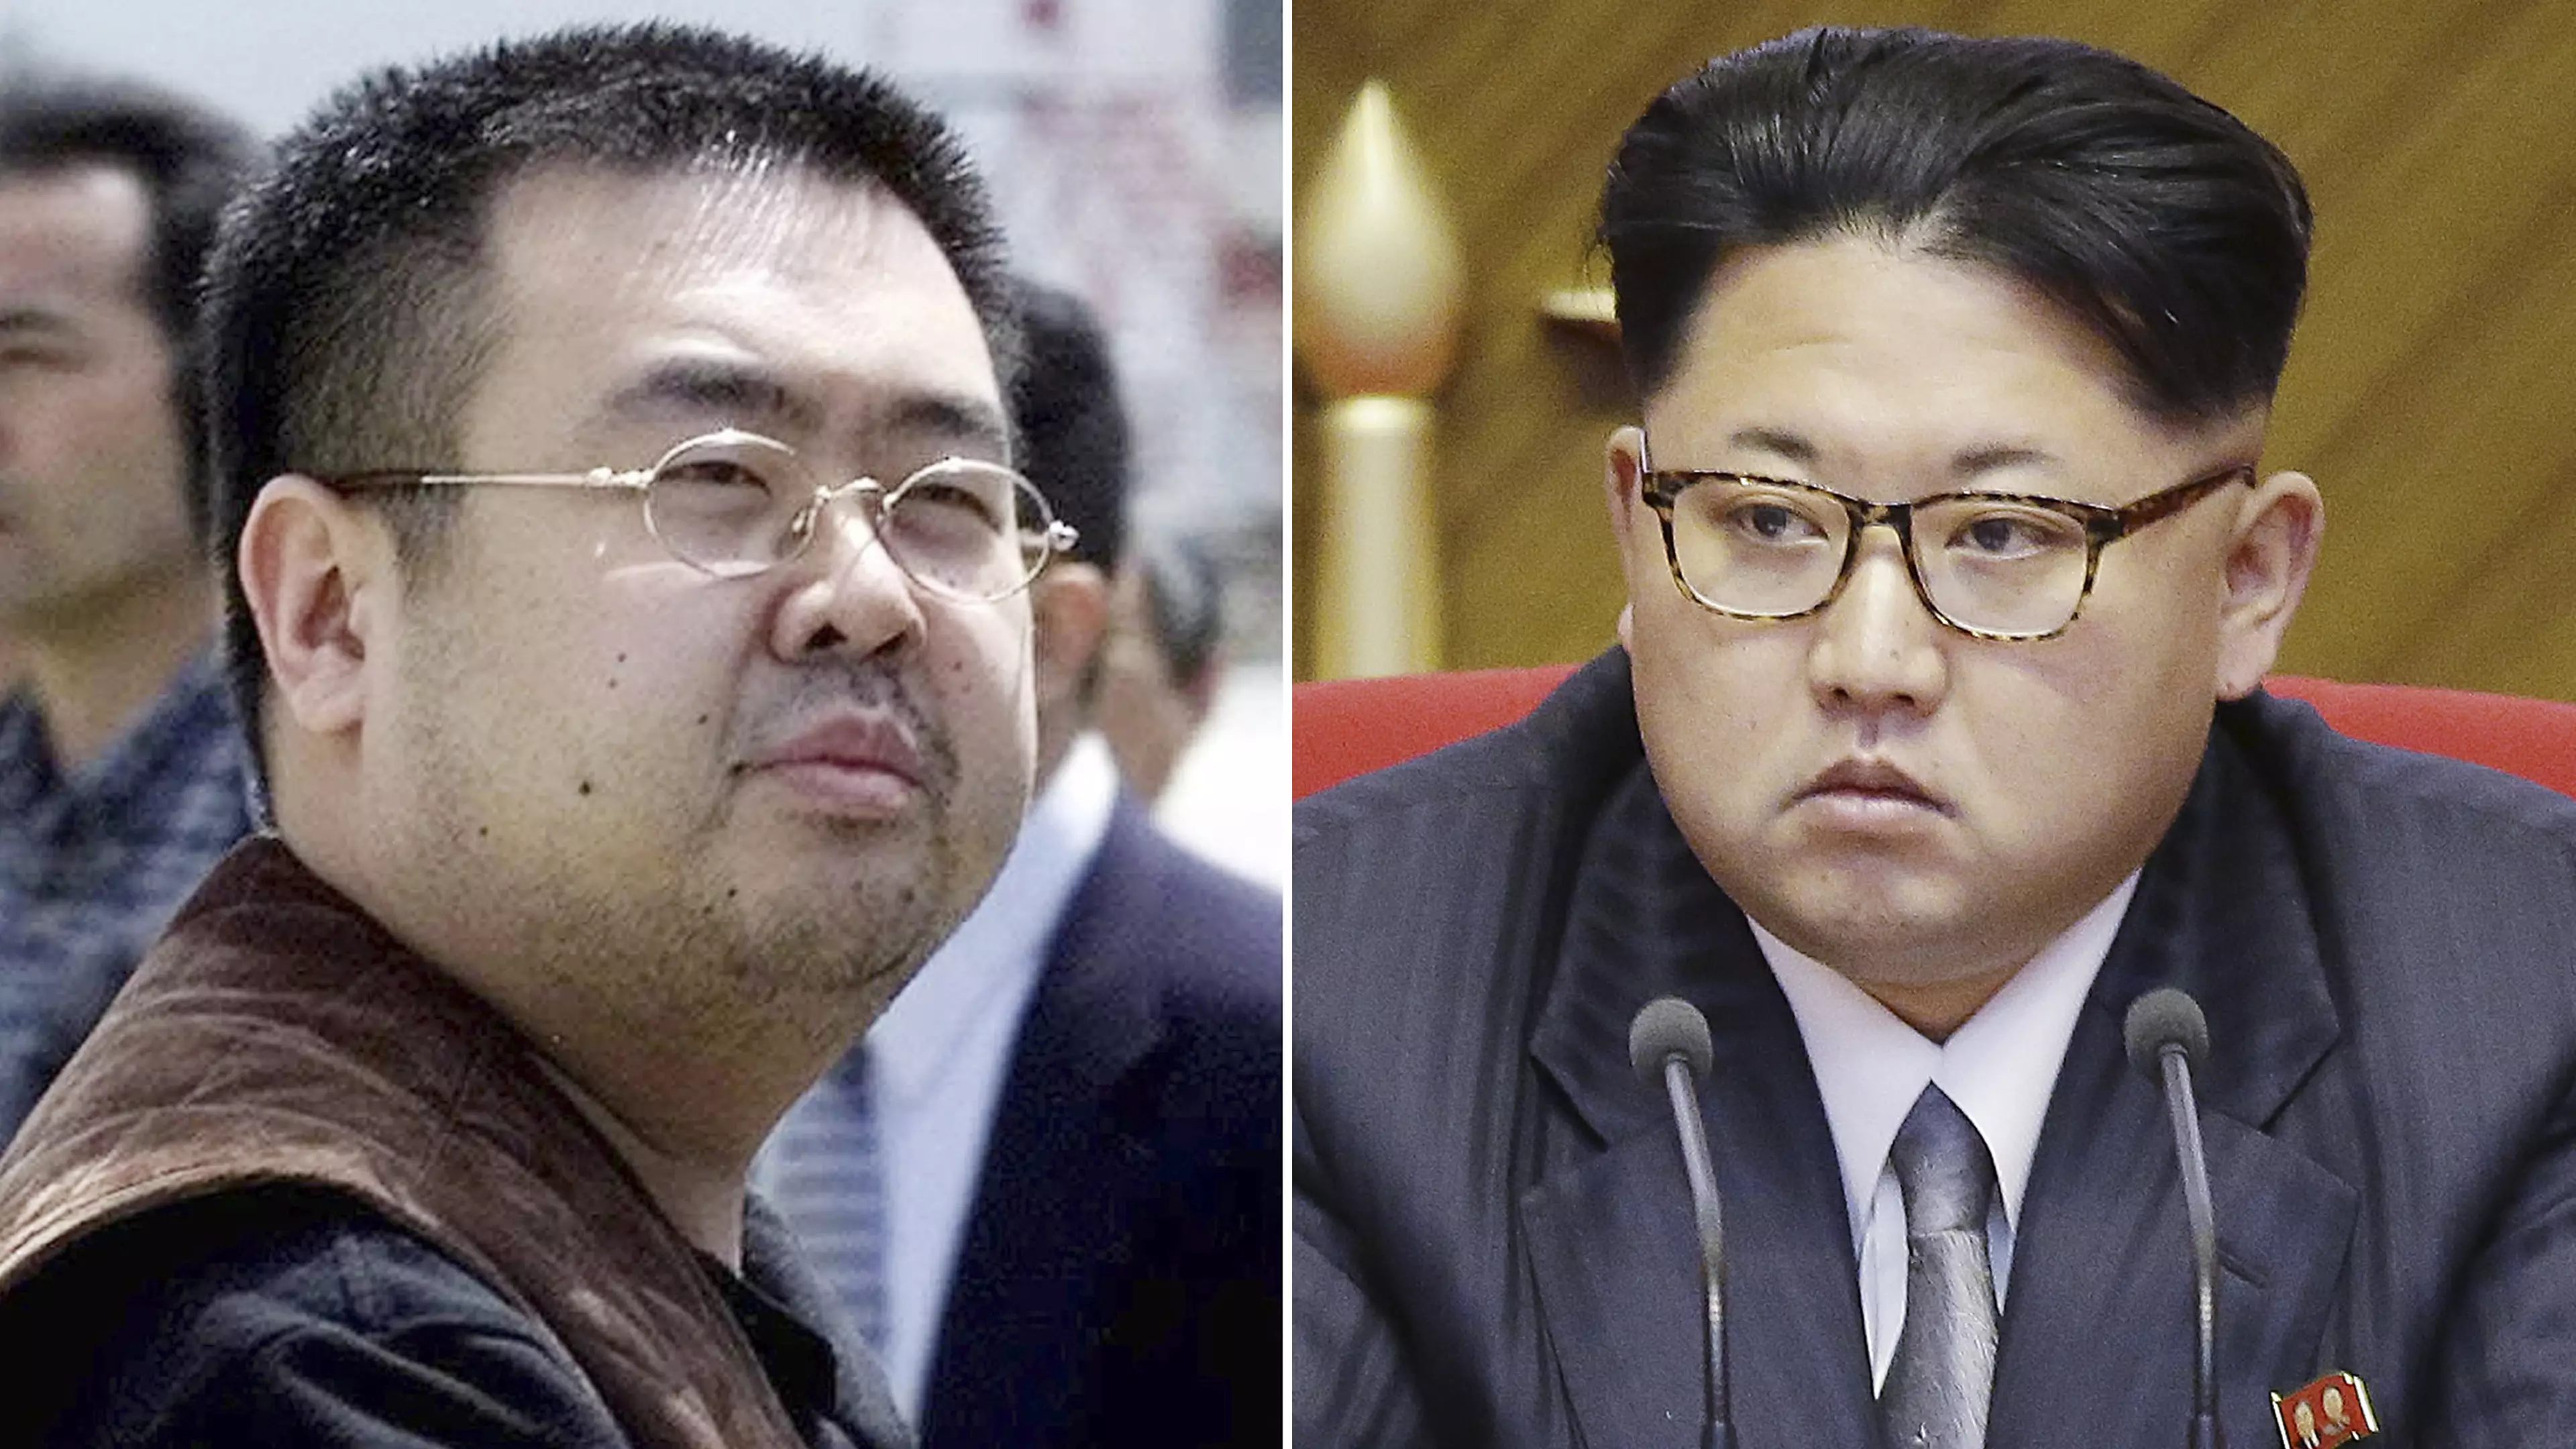 Pictures Released Of Woman Suspected Of Killing Kim Jong-Un's Half-Brother